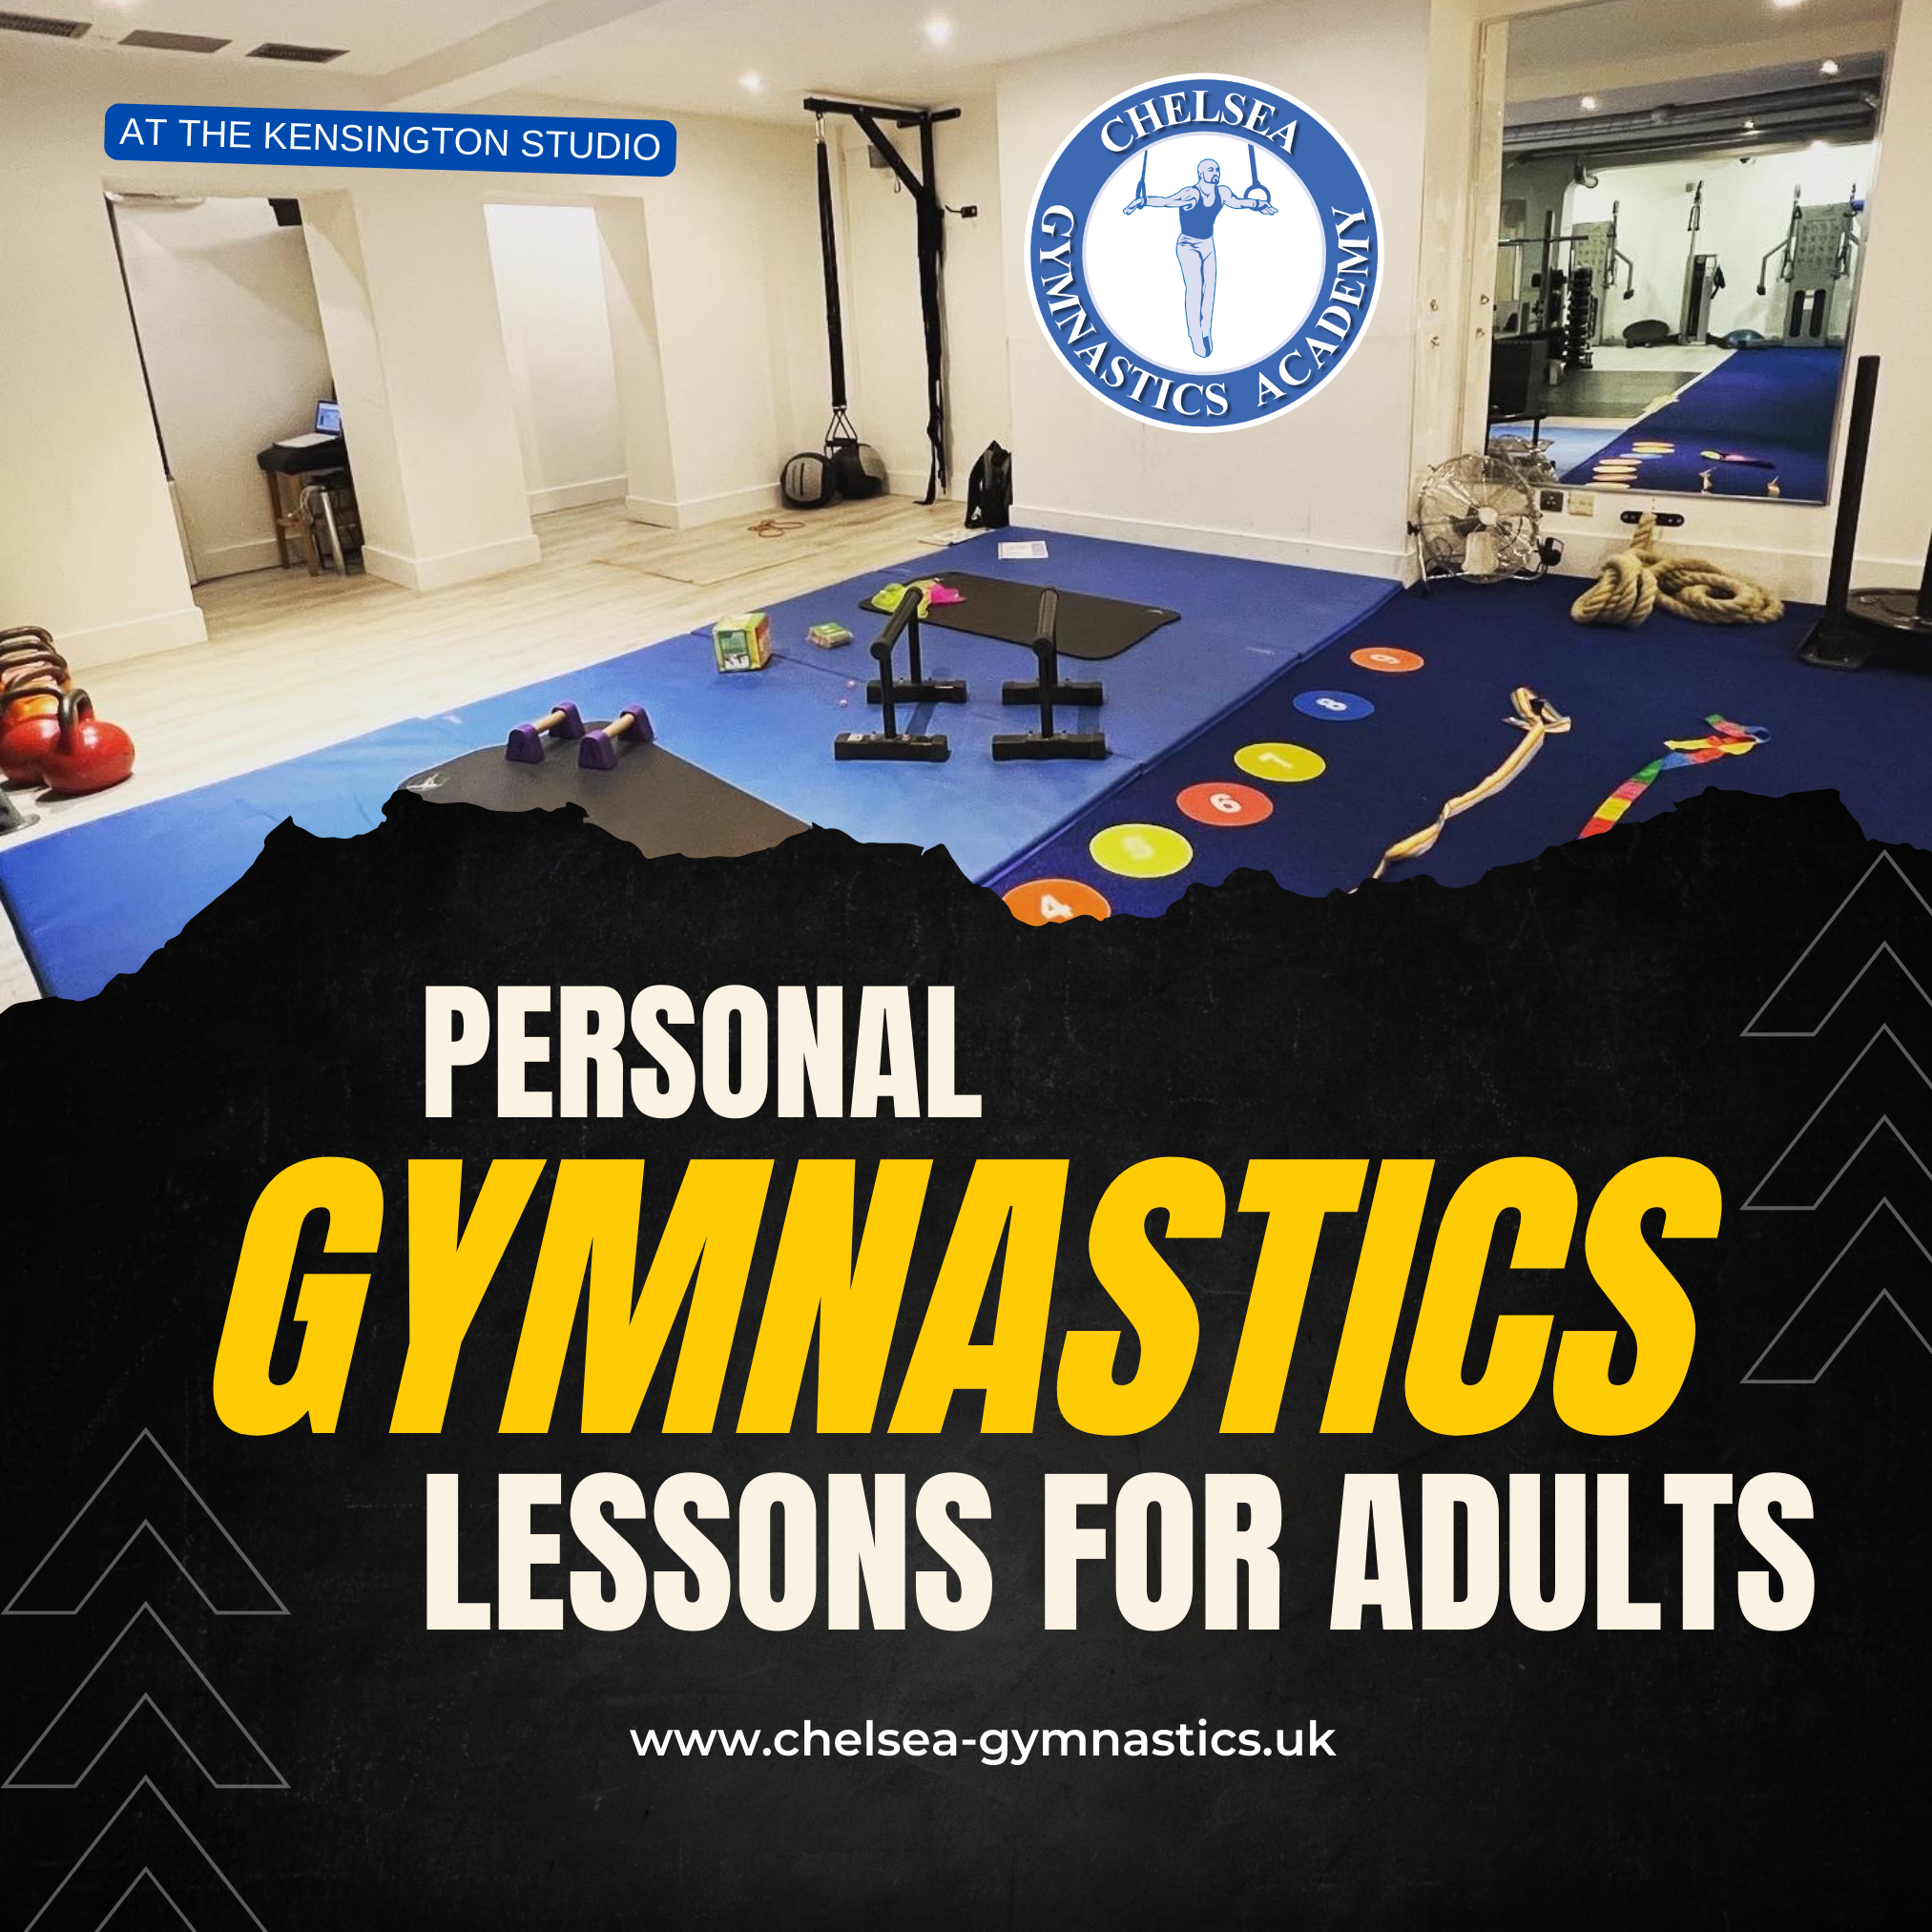 Gymnastics Sessions For Adults at the Kensington Studio